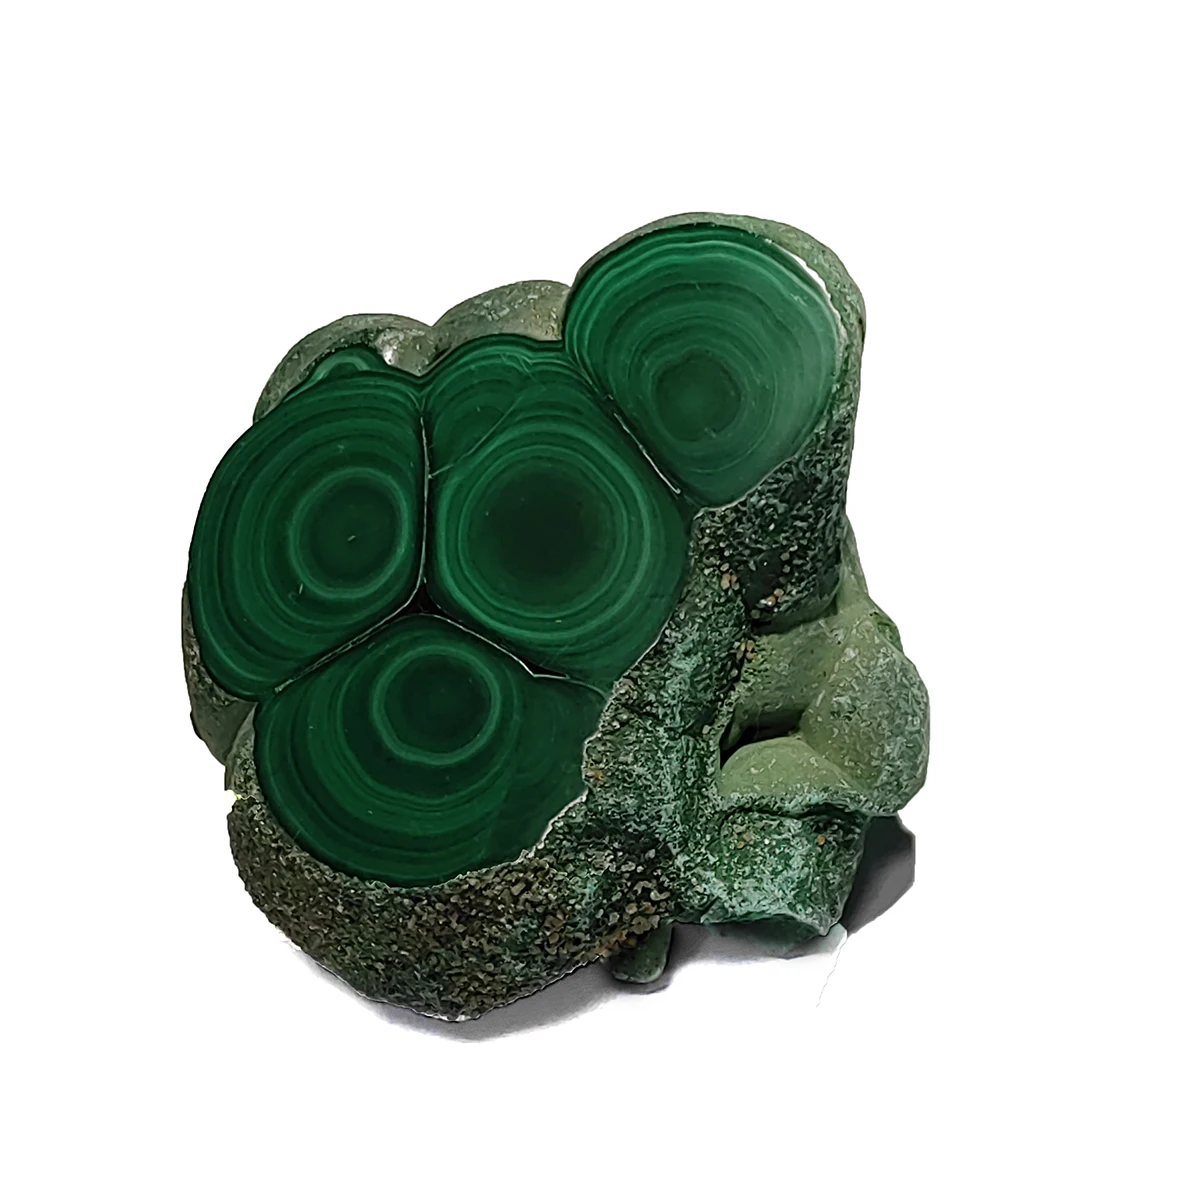 

C7-3A 1PCS 100% Natural Malachite Polished Mineral Rough Stone Slices Quartz and Crystals Repair Crystal Teaching Specimens